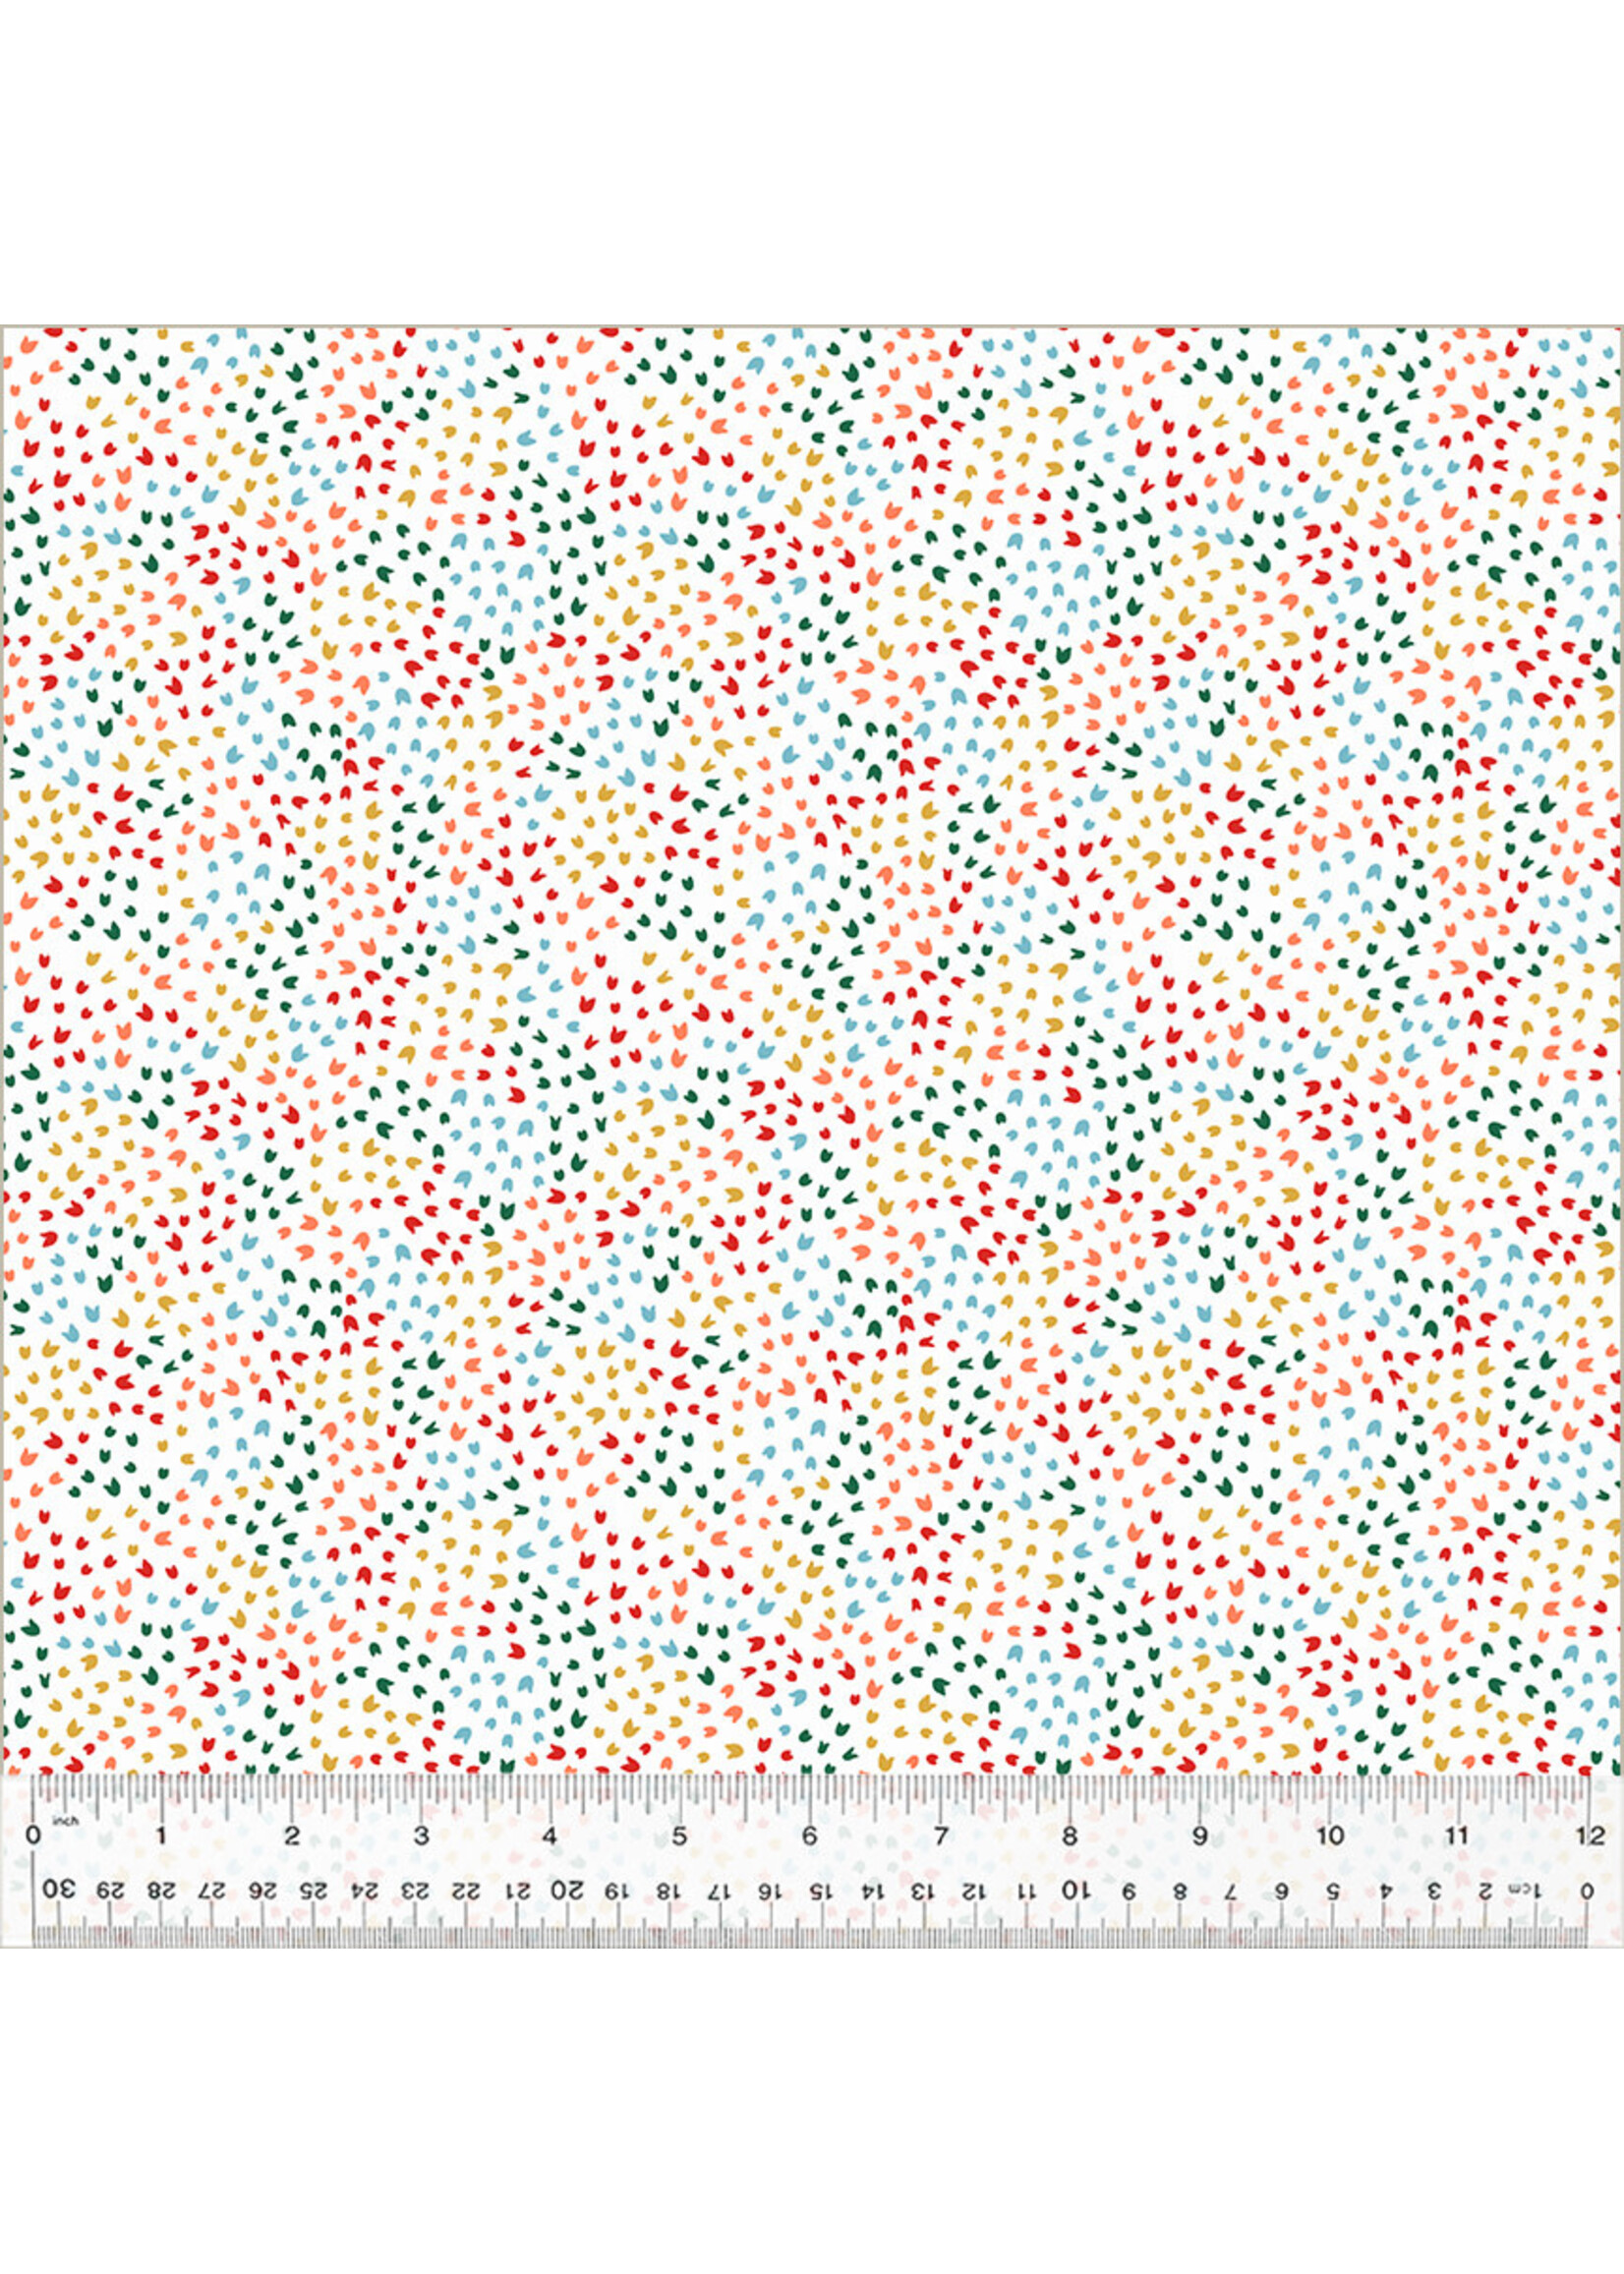 Windham Fabrics Clover & Dot - Scattered Petals - White - 538661